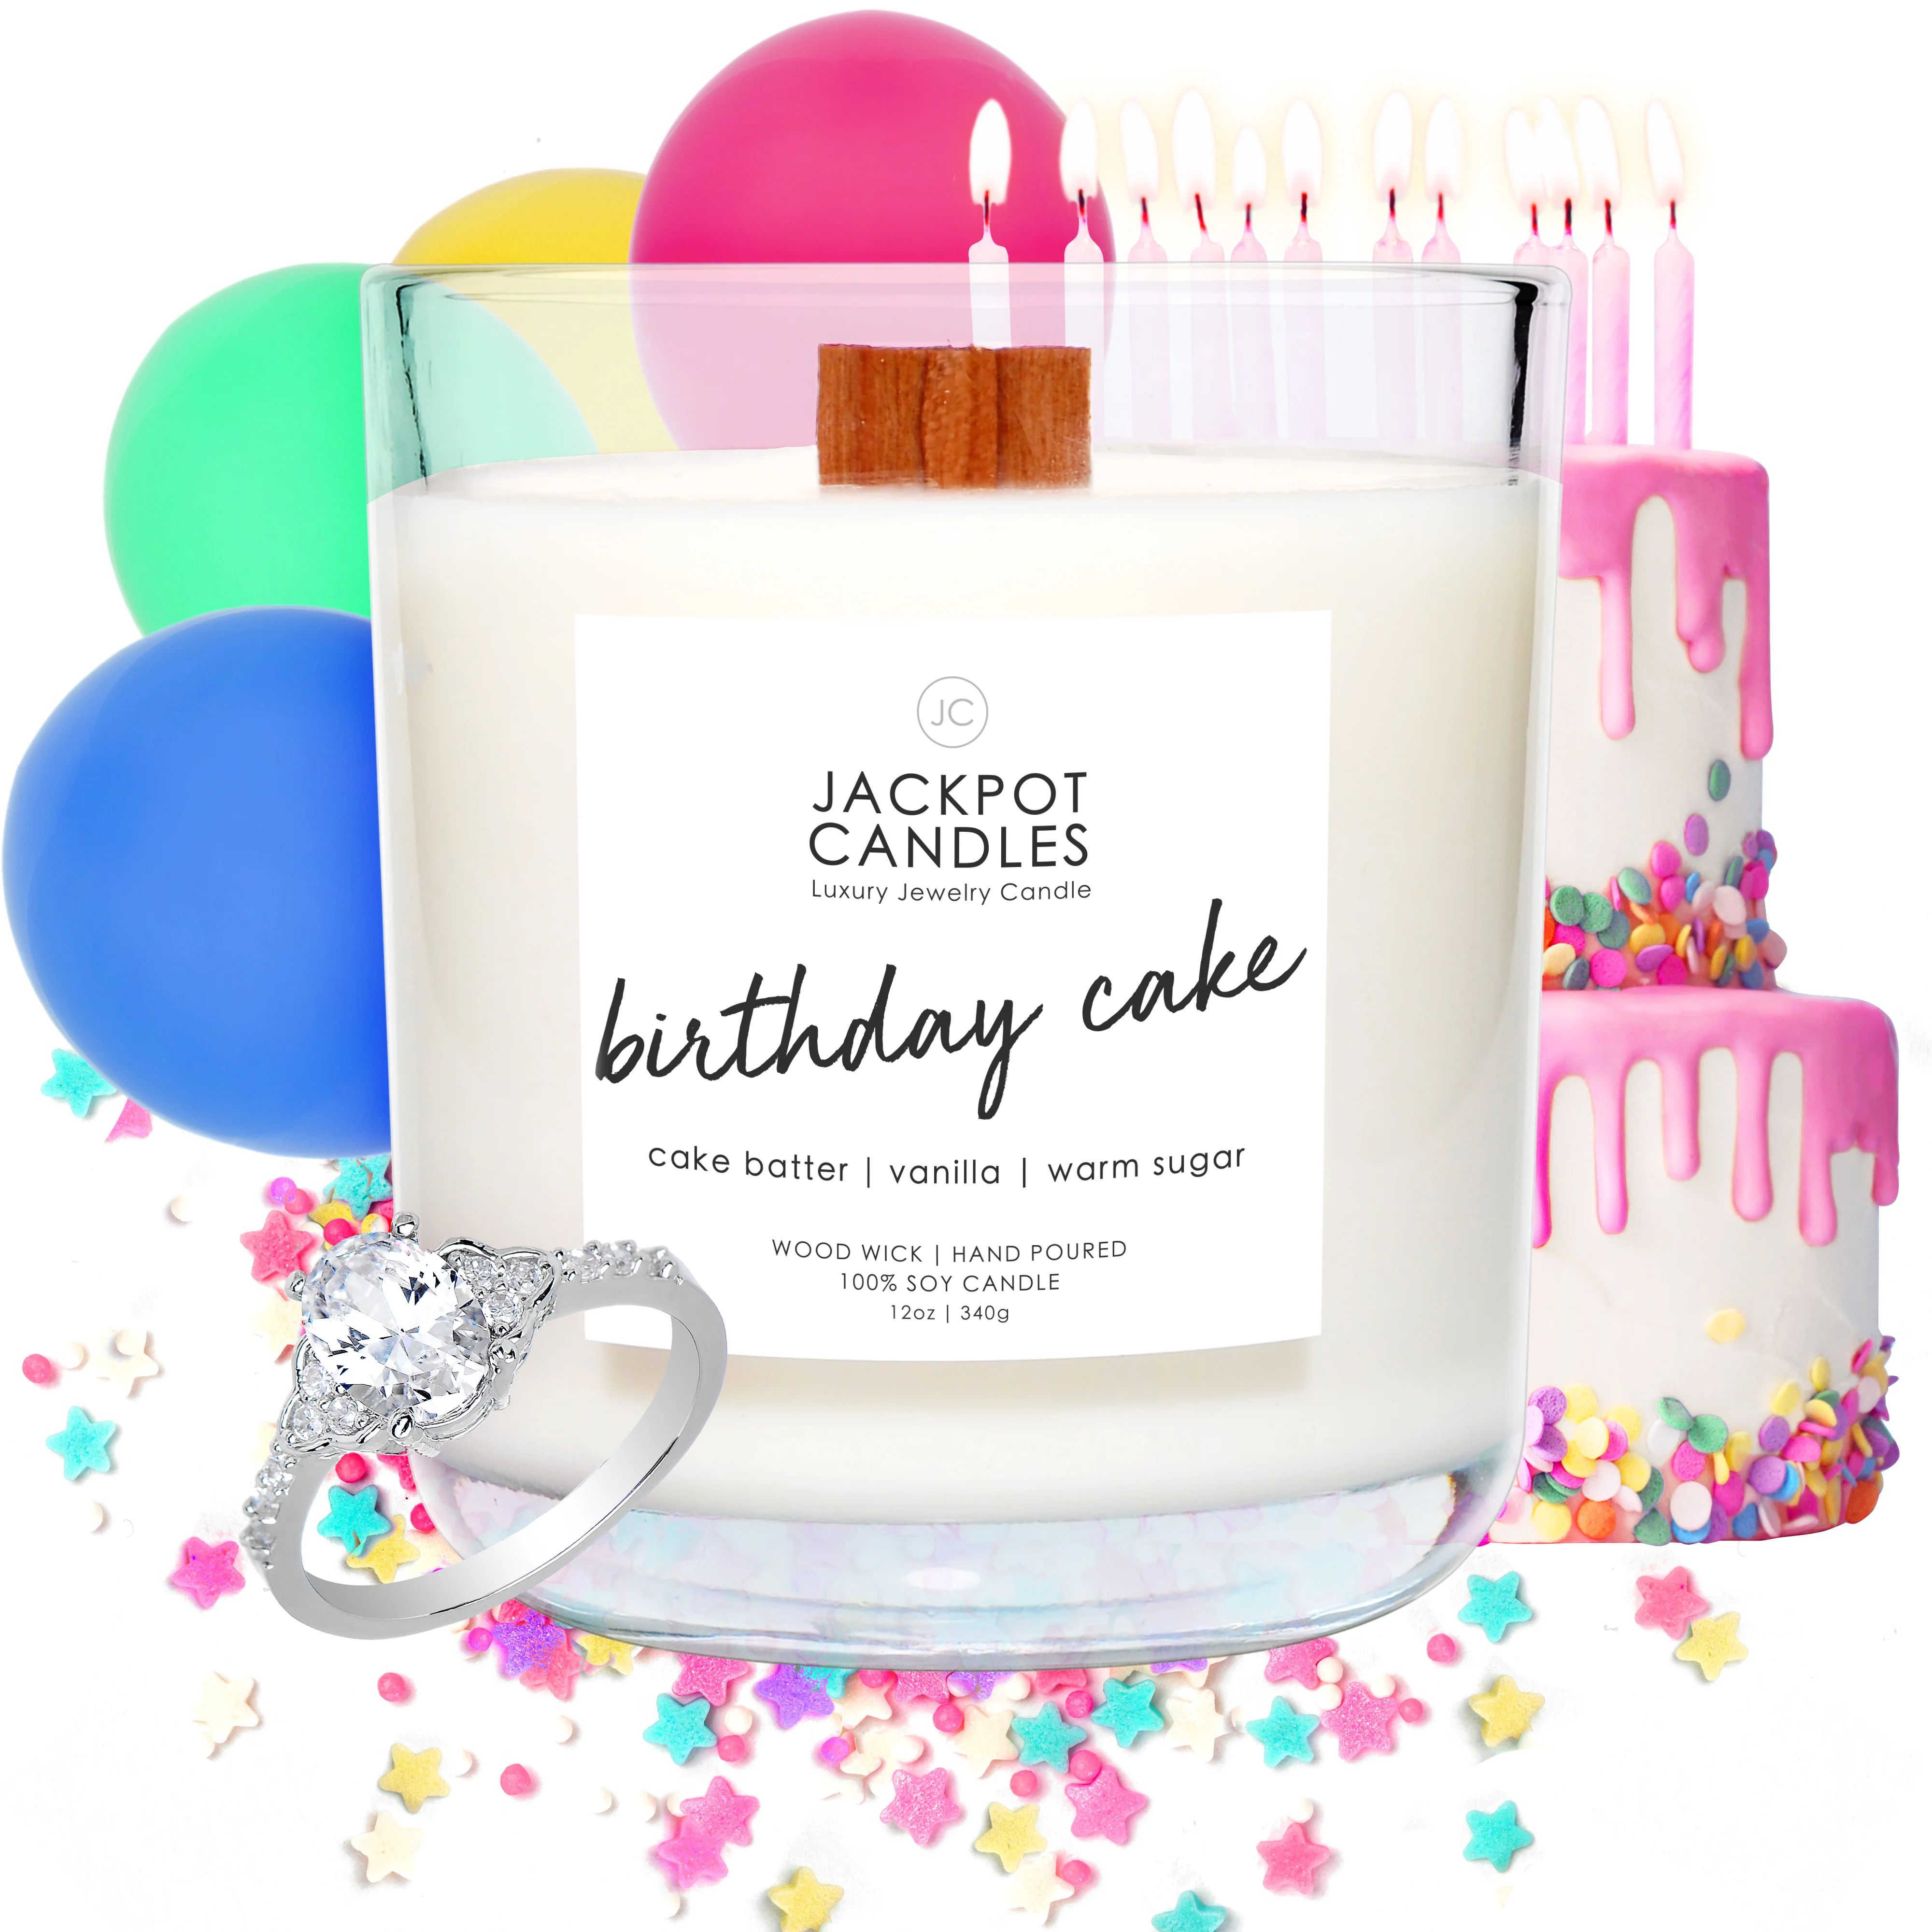 Birthday Cake Wooden Wick Scented Candle, Jewelry Candle with Ring Inside, Size 5 | Jackpot Candles